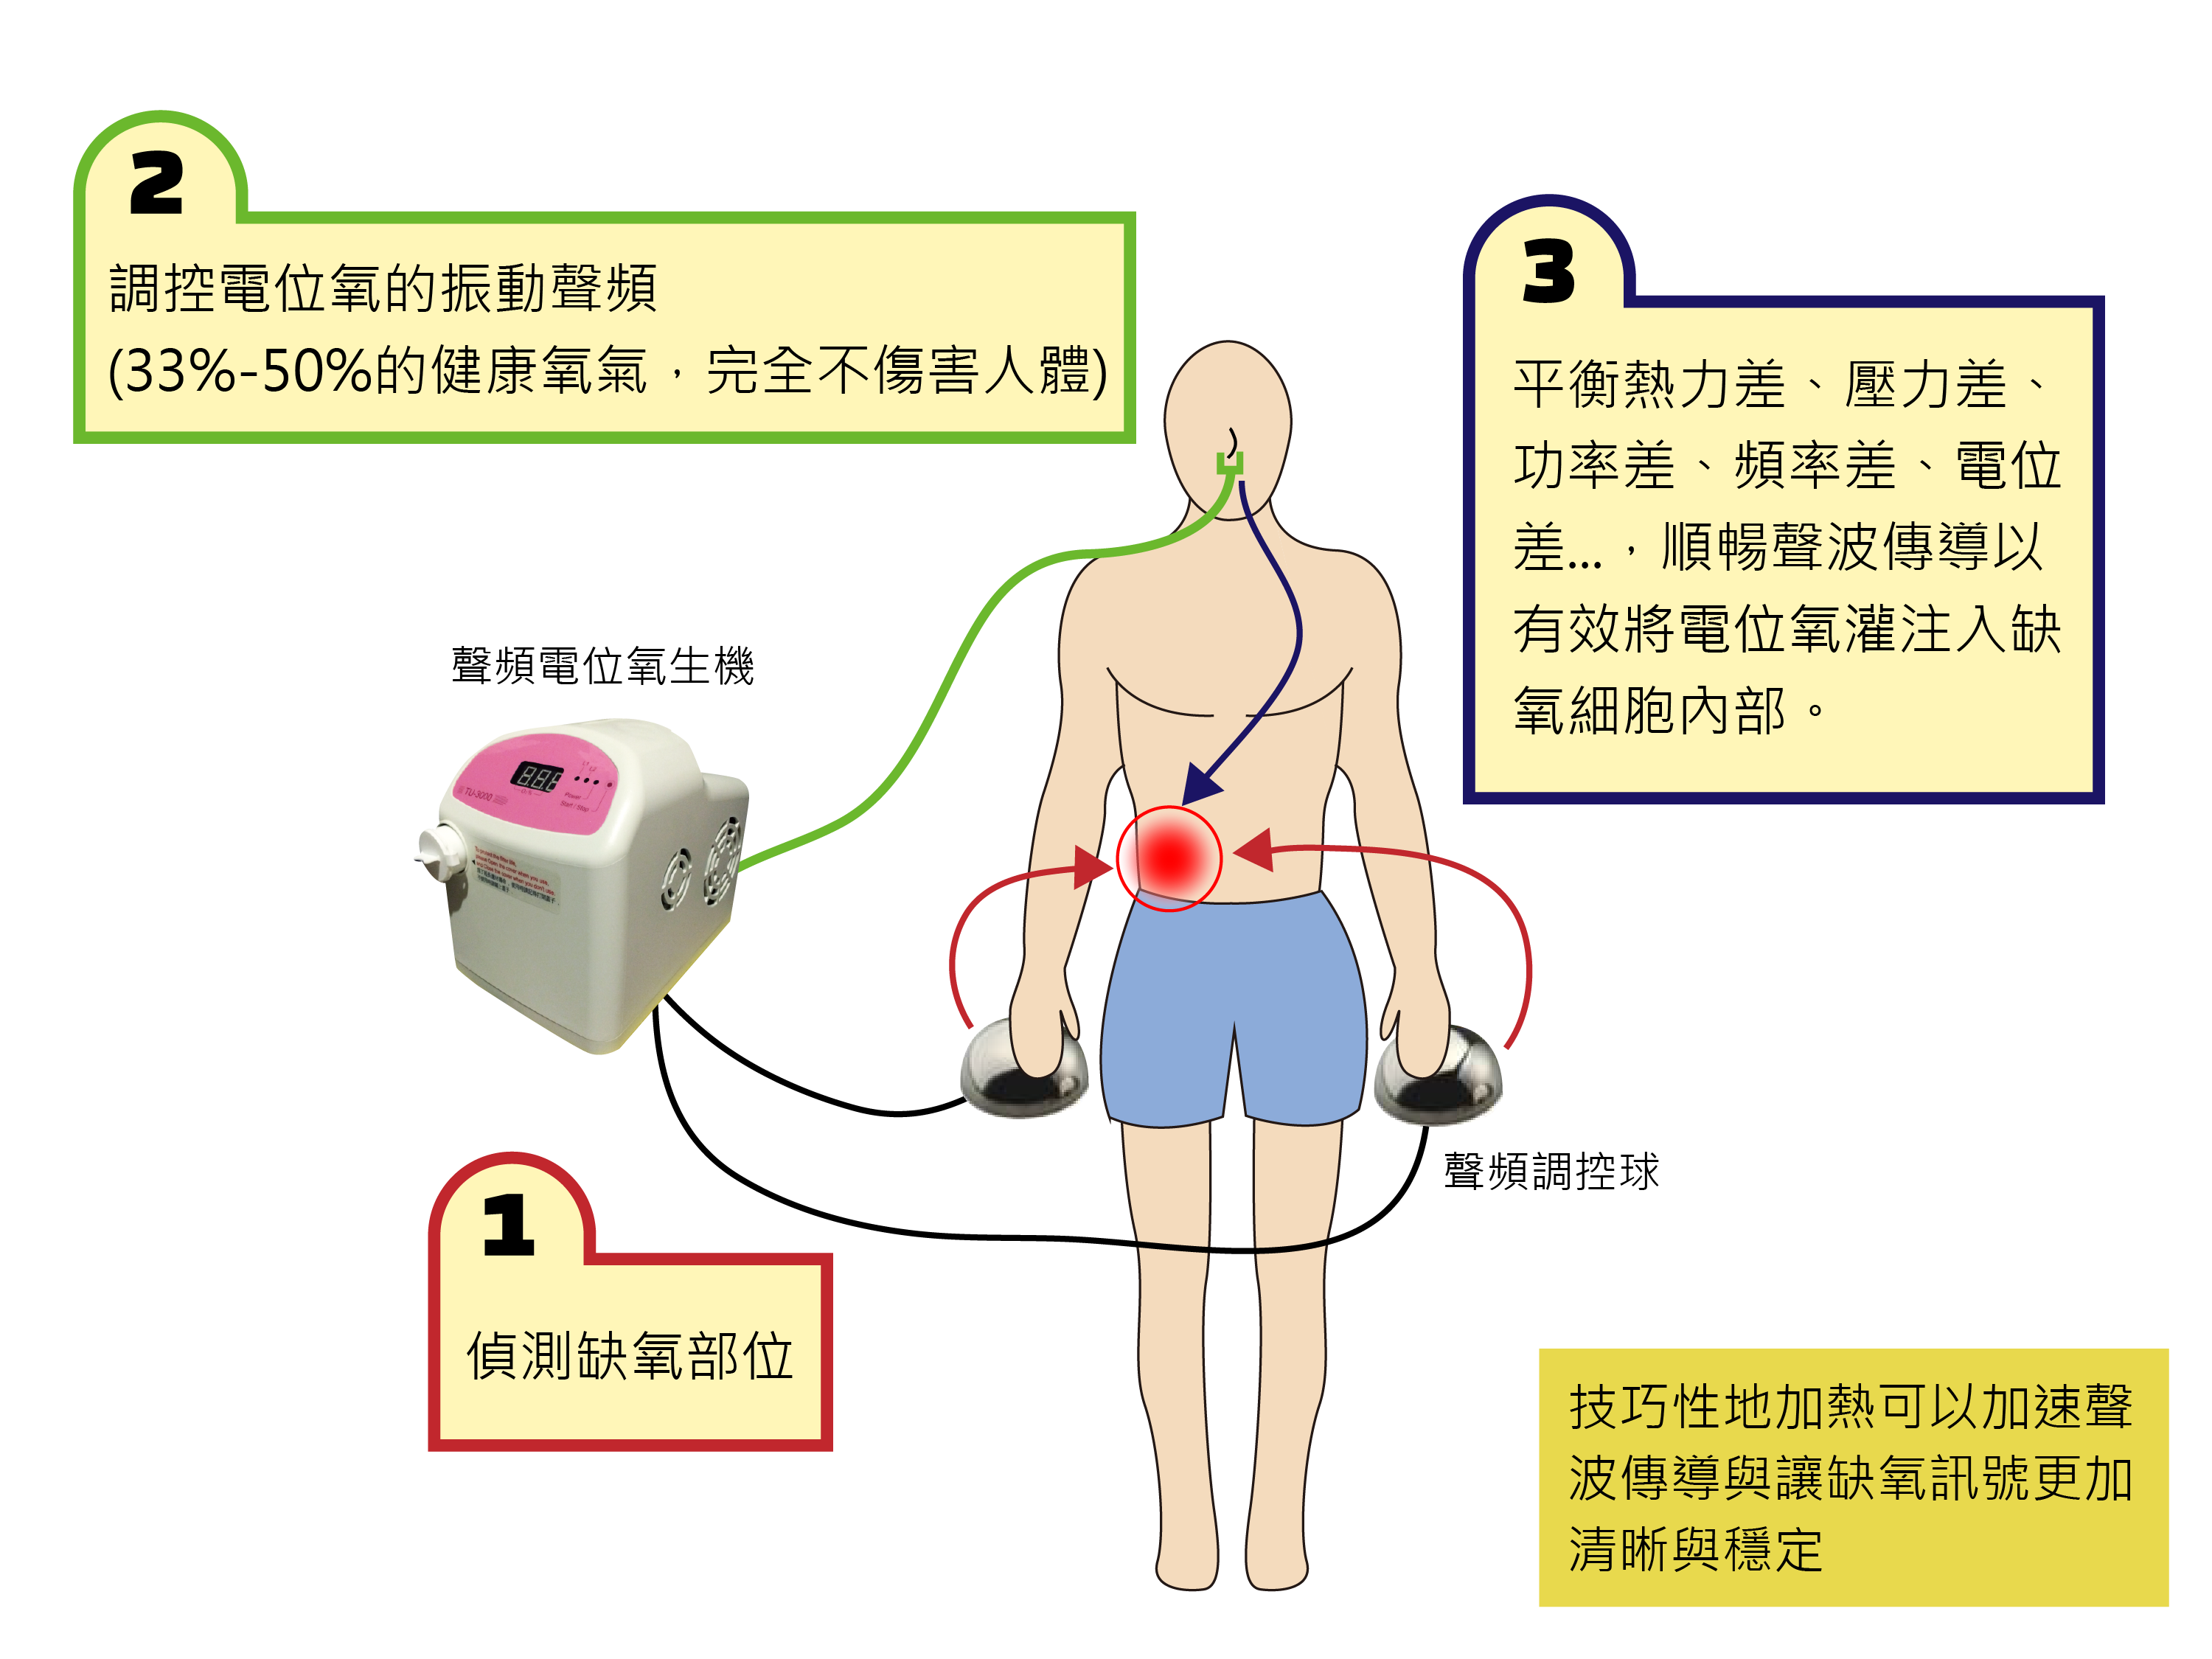 The working principles of TreatU Potential Oxygen System